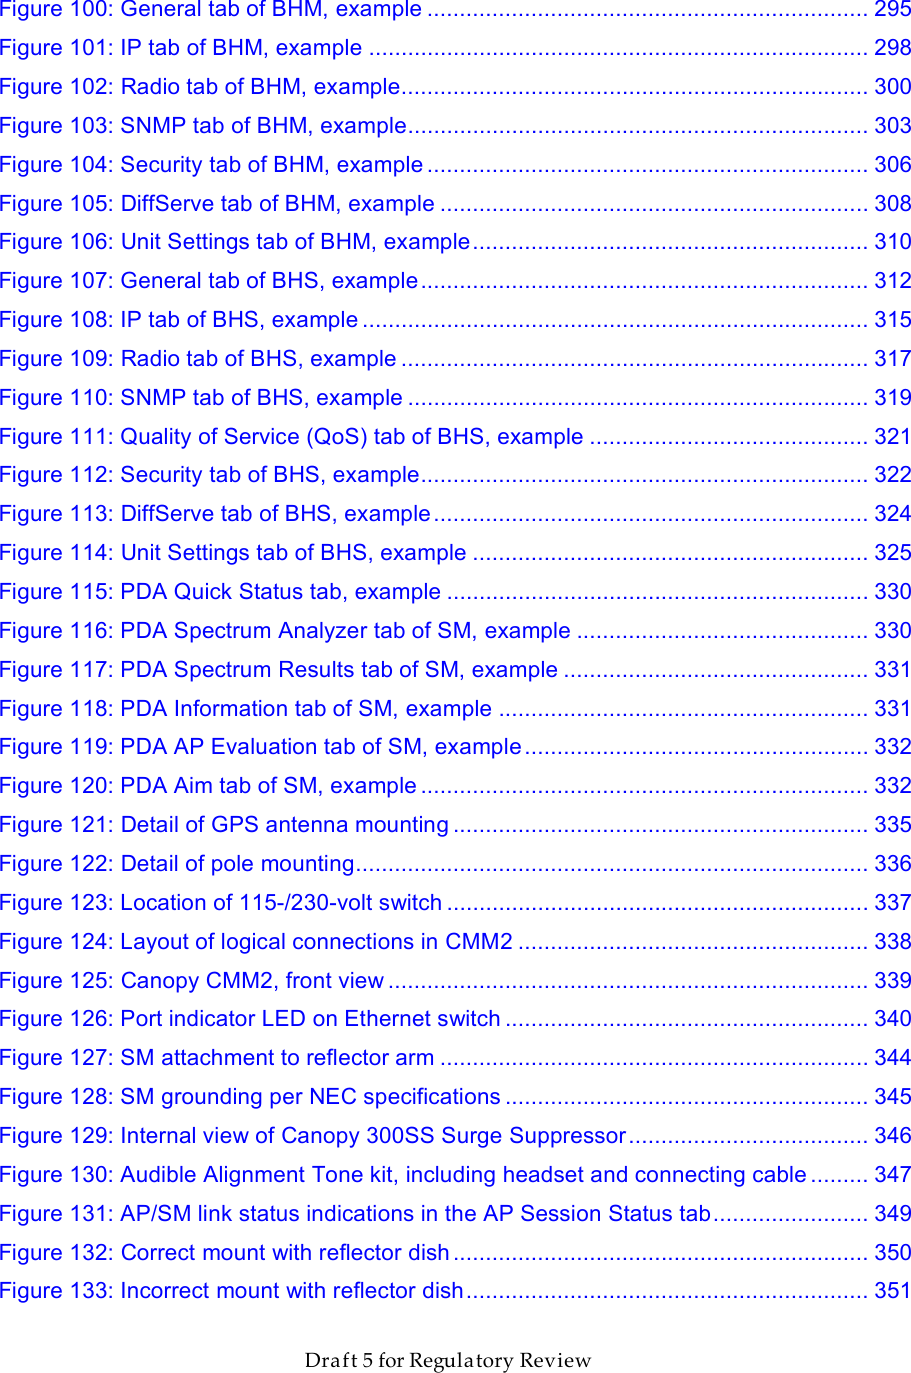                  March 200                  Through Software Release 6.       Draft 5 for Regulatory Review Figure 100: General tab of BHM, example .................................................................... 295 Figure 101: IP tab of BHM, example ............................................................................. 298 Figure 102: Radio tab of BHM, example........................................................................ 300 Figure 103: SNMP tab of BHM, example....................................................................... 303 Figure 104: Security tab of BHM, example .................................................................... 306 Figure 105: DiffServe tab of BHM, example .................................................................. 308 Figure 106: Unit Settings tab of BHM, example............................................................. 310 Figure 107: General tab of BHS, example..................................................................... 312 Figure 108: IP tab of BHS, example .............................................................................. 315 Figure 109: Radio tab of BHS, example ........................................................................ 317 Figure 110: SNMP tab of BHS, example ....................................................................... 319 Figure 111: Quality of Service (QoS) tab of BHS, example ........................................... 321 Figure 112: Security tab of BHS, example..................................................................... 322 Figure 113: DiffServe tab of BHS, example................................................................... 324 Figure 114: Unit Settings tab of BHS, example ............................................................. 325 Figure 115: PDA Quick Status tab, example ................................................................. 330 Figure 116: PDA Spectrum Analyzer tab of SM, example ............................................. 330 Figure 117: PDA Spectrum Results tab of SM, example ............................................... 331 Figure 118: PDA Information tab of SM, example ......................................................... 331 Figure 119: PDA AP Evaluation tab of SM, example ..................................................... 332 Figure 120: PDA Aim tab of SM, example ..................................................................... 332 Figure 121: Detail of GPS antenna mounting ................................................................ 335 Figure 122: Detail of pole mounting............................................................................... 336 Figure 123: Location of 115-/230-volt switch ................................................................. 337 Figure 124: Layout of logical connections in CMM2 ...................................................... 338 Figure 125: Canopy CMM2, front view .......................................................................... 339 Figure 126: Port indicator LED on Ethernet switch ........................................................ 340 Figure 127: SM attachment to reflector arm .................................................................. 344 Figure 128: SM grounding per NEC specifications ........................................................ 345 Figure 129: Internal view of Canopy 300SS Surge Suppressor..................................... 346 Figure 130: Audible Alignment Tone kit, including headset and connecting cable ......... 347 Figure 131: AP/SM link status indications in the AP Session Status tab........................ 349 Figure 132: Correct mount with reflector dish ................................................................ 350 Figure 133: Incorrect mount with reflector dish.............................................................. 351 